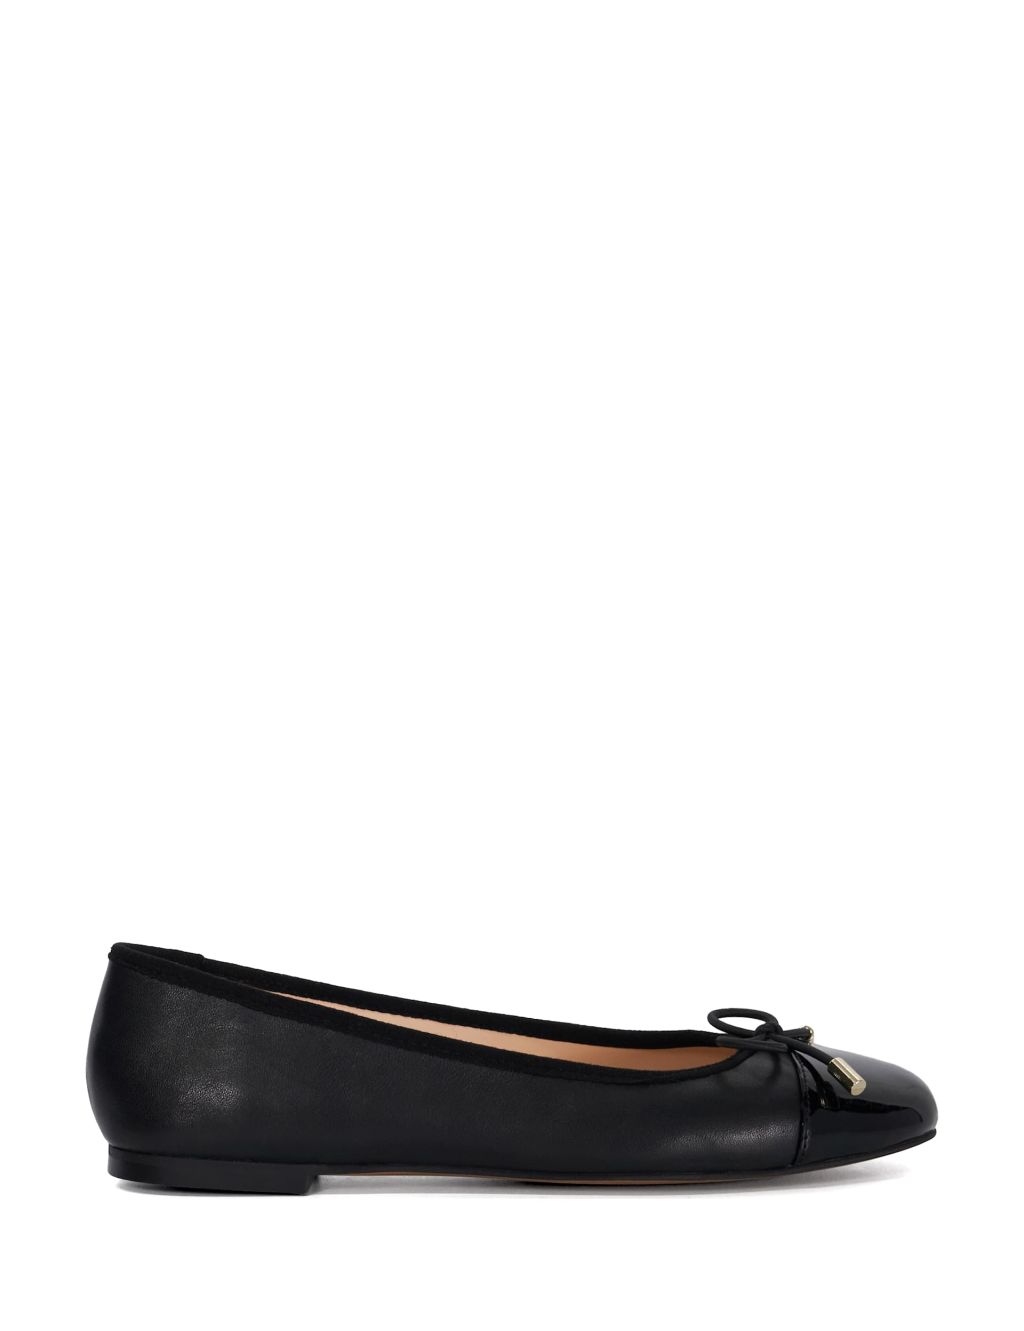 Leather Flat Ballet Pumps 3 of 5